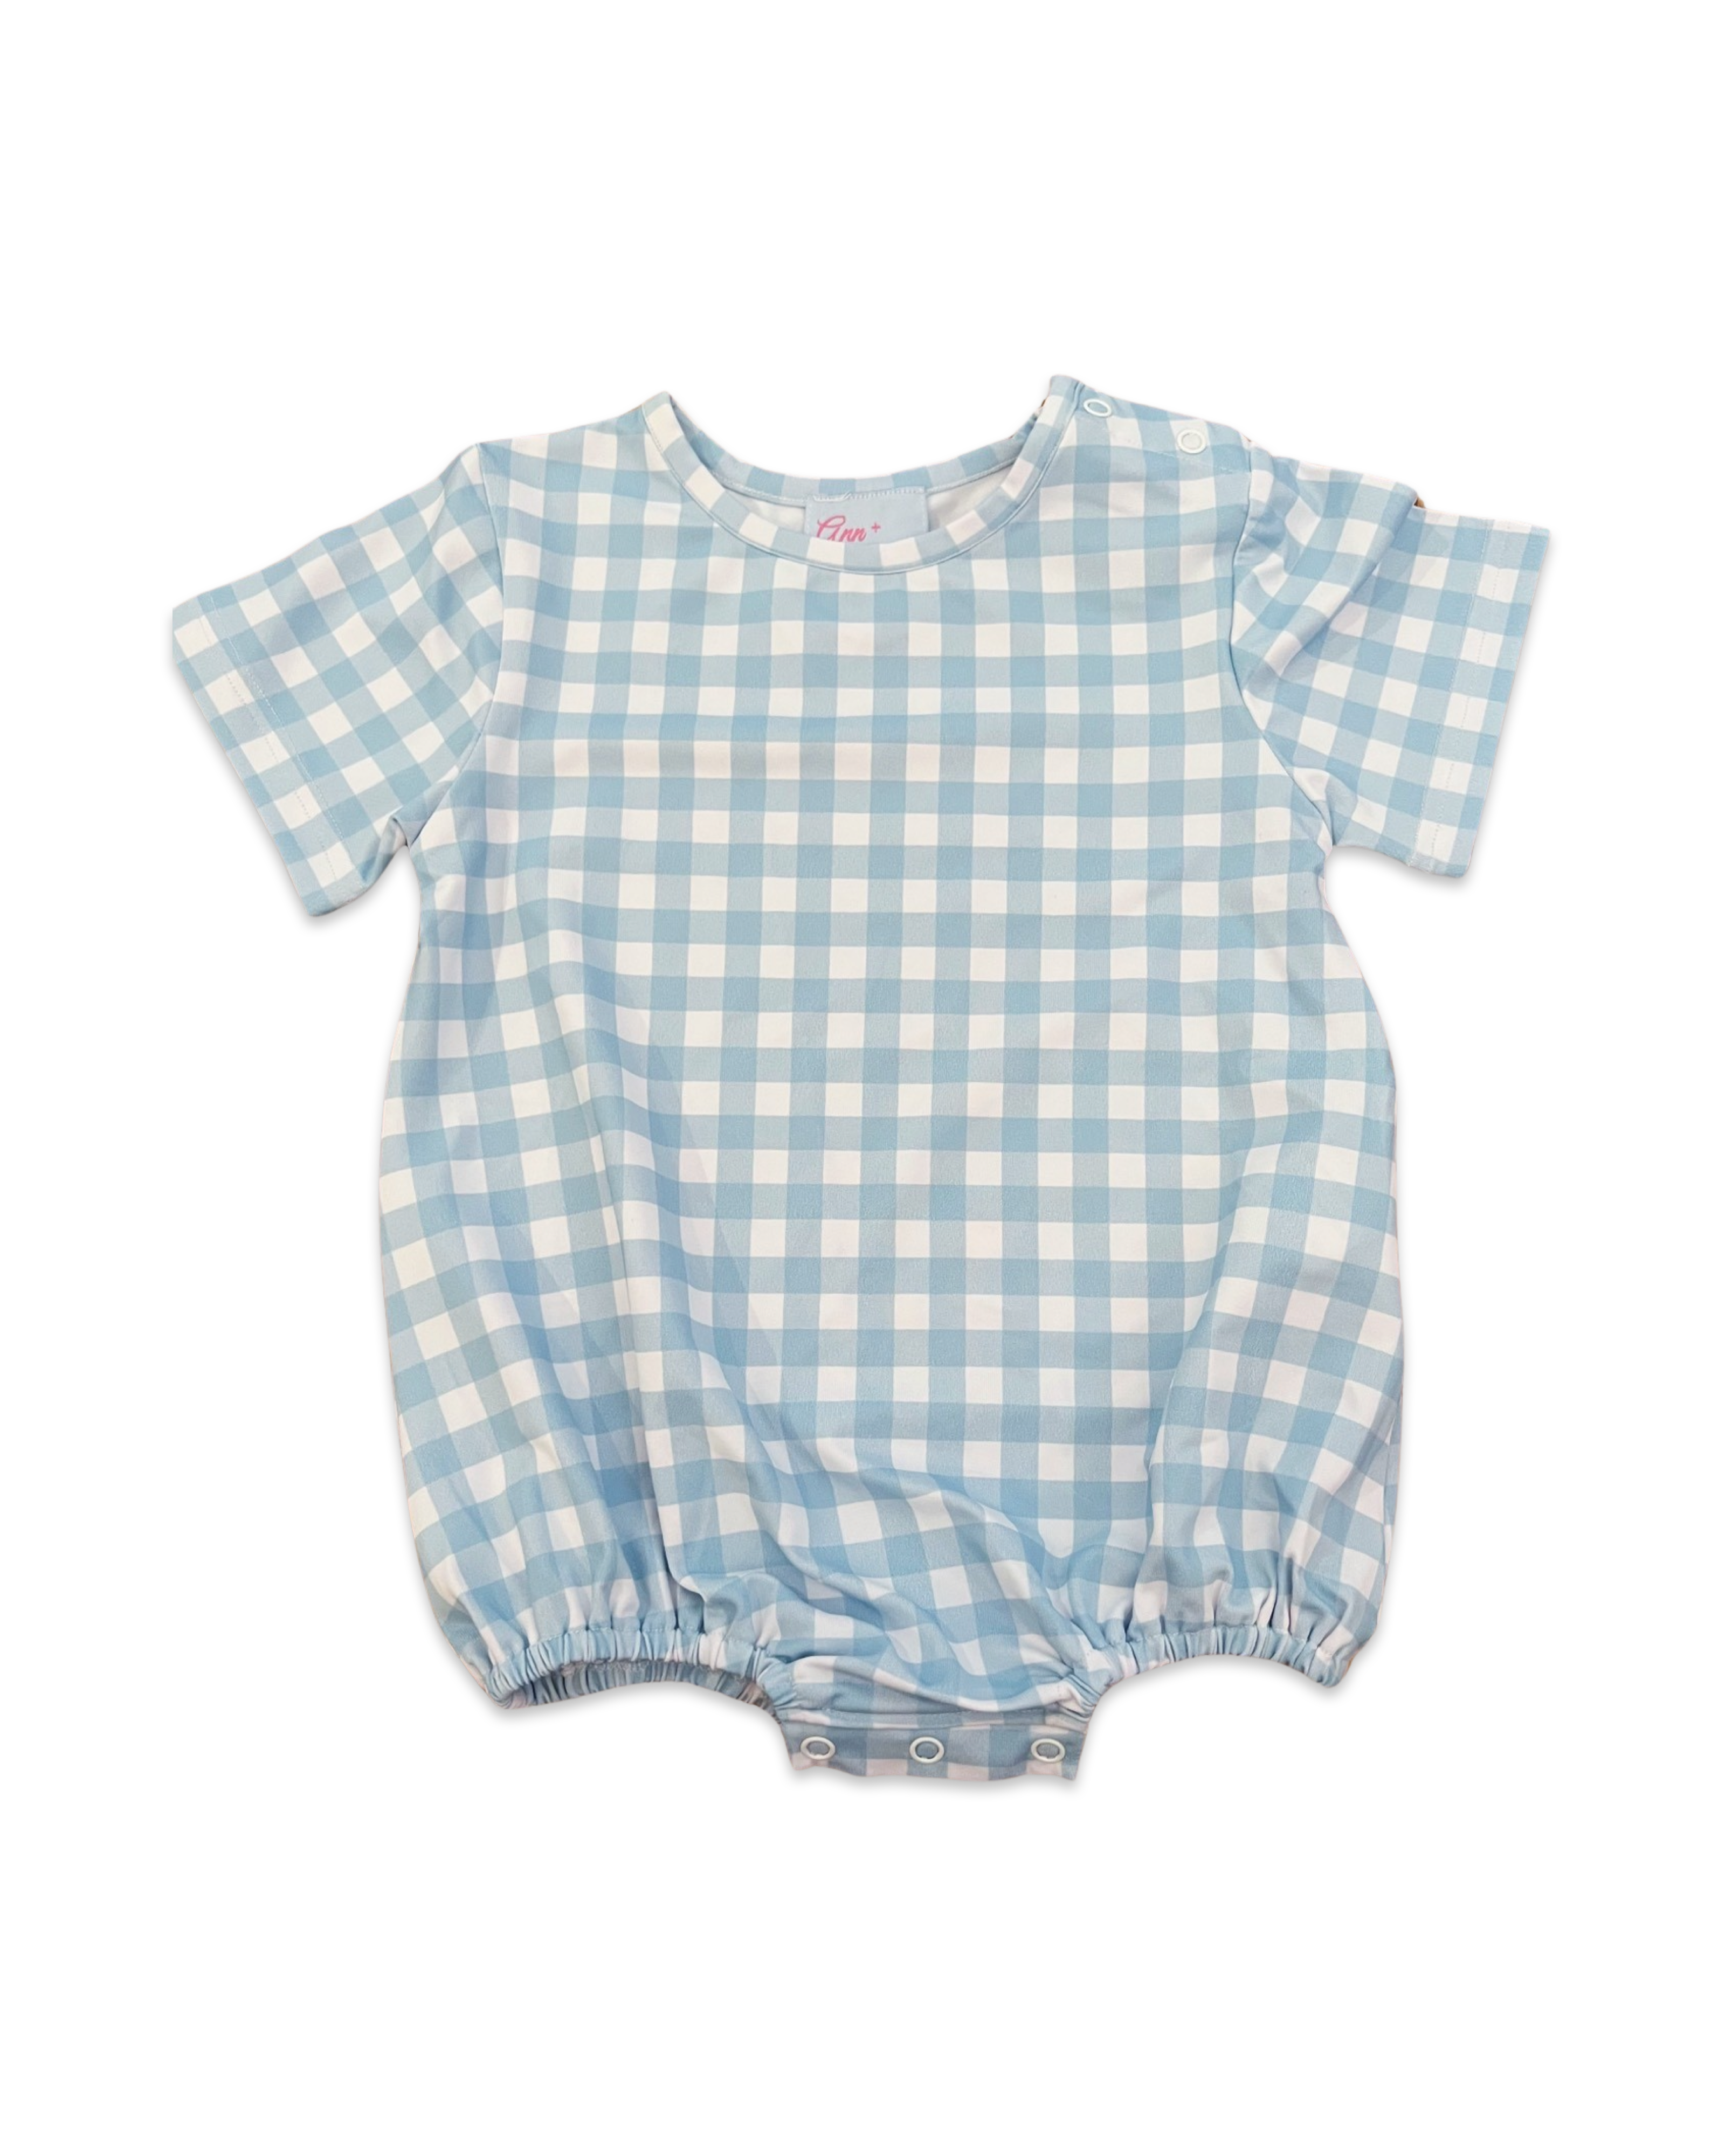 Sunshine and Gingham - Harry Bubble